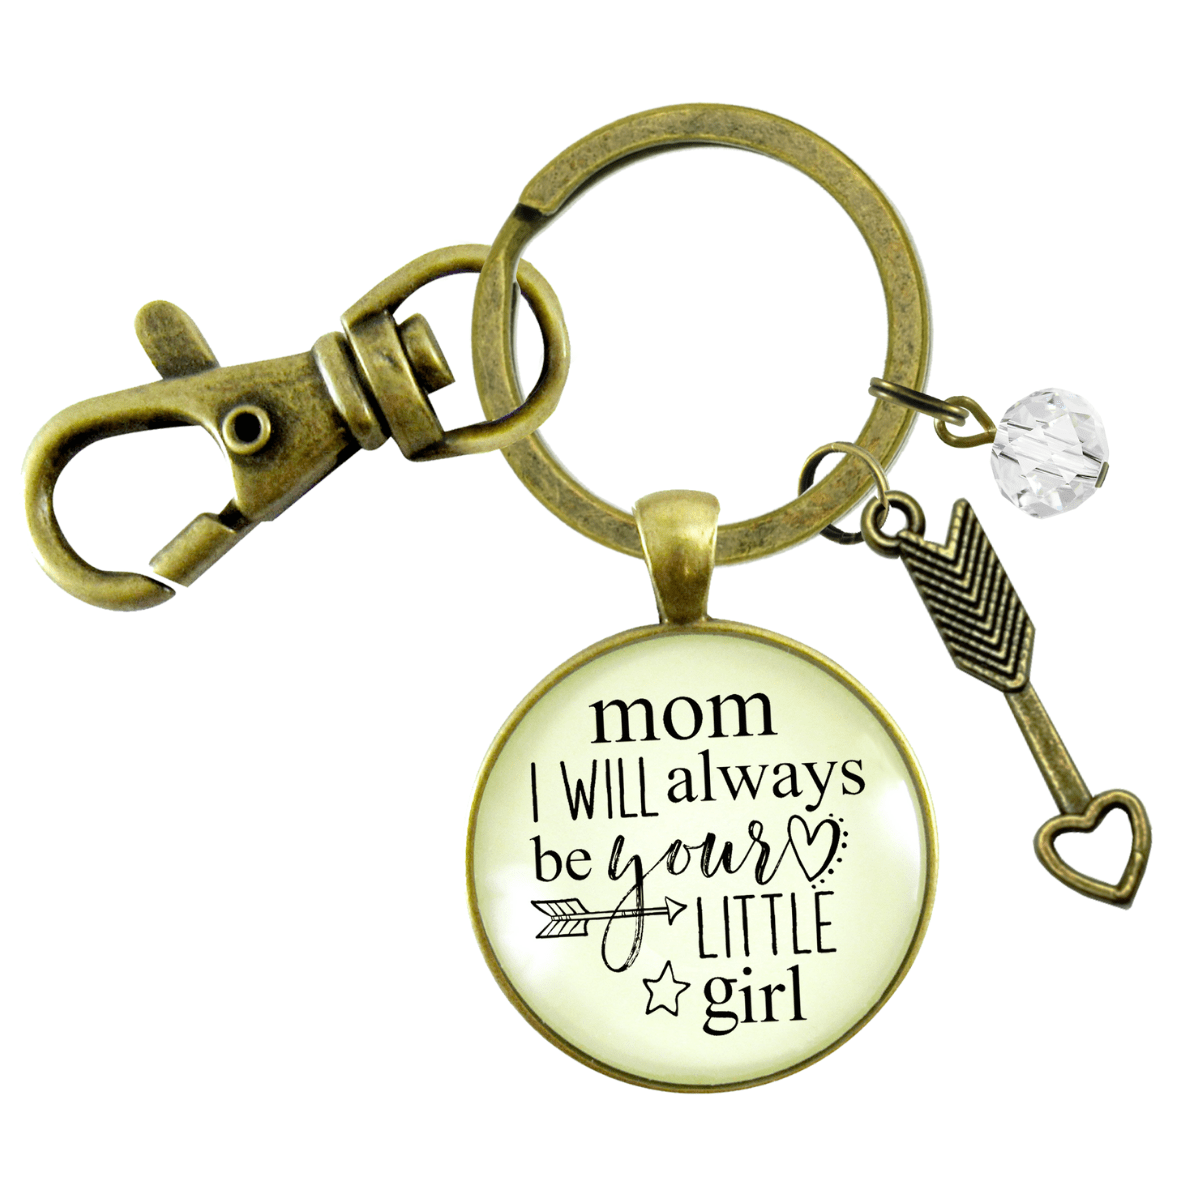 To My Mom Keychain Always Be Daughter Meaningful Heartfelt Mother Jewelry Gift - Gutsy Goodness Handmade Jewelry;To My Mom Keychain Always Be Daughter Meaningful Heartfelt Mother Jewelry Gift - Gutsy Goodness Handmade Jewelry Gifts